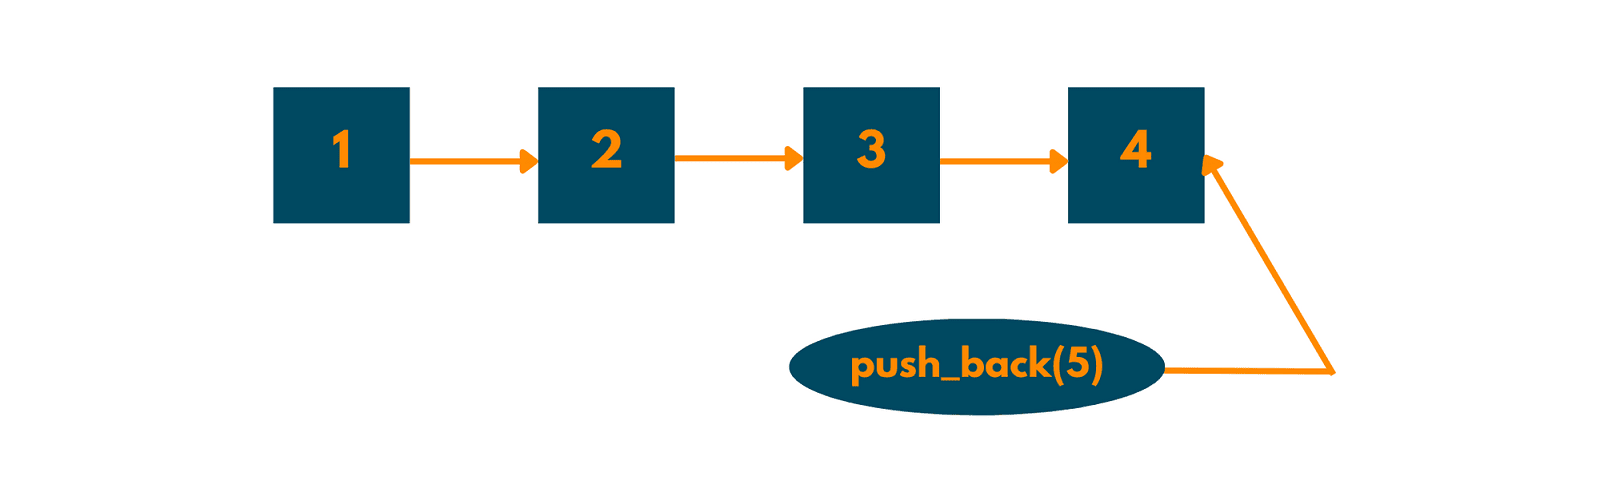 push back vector example